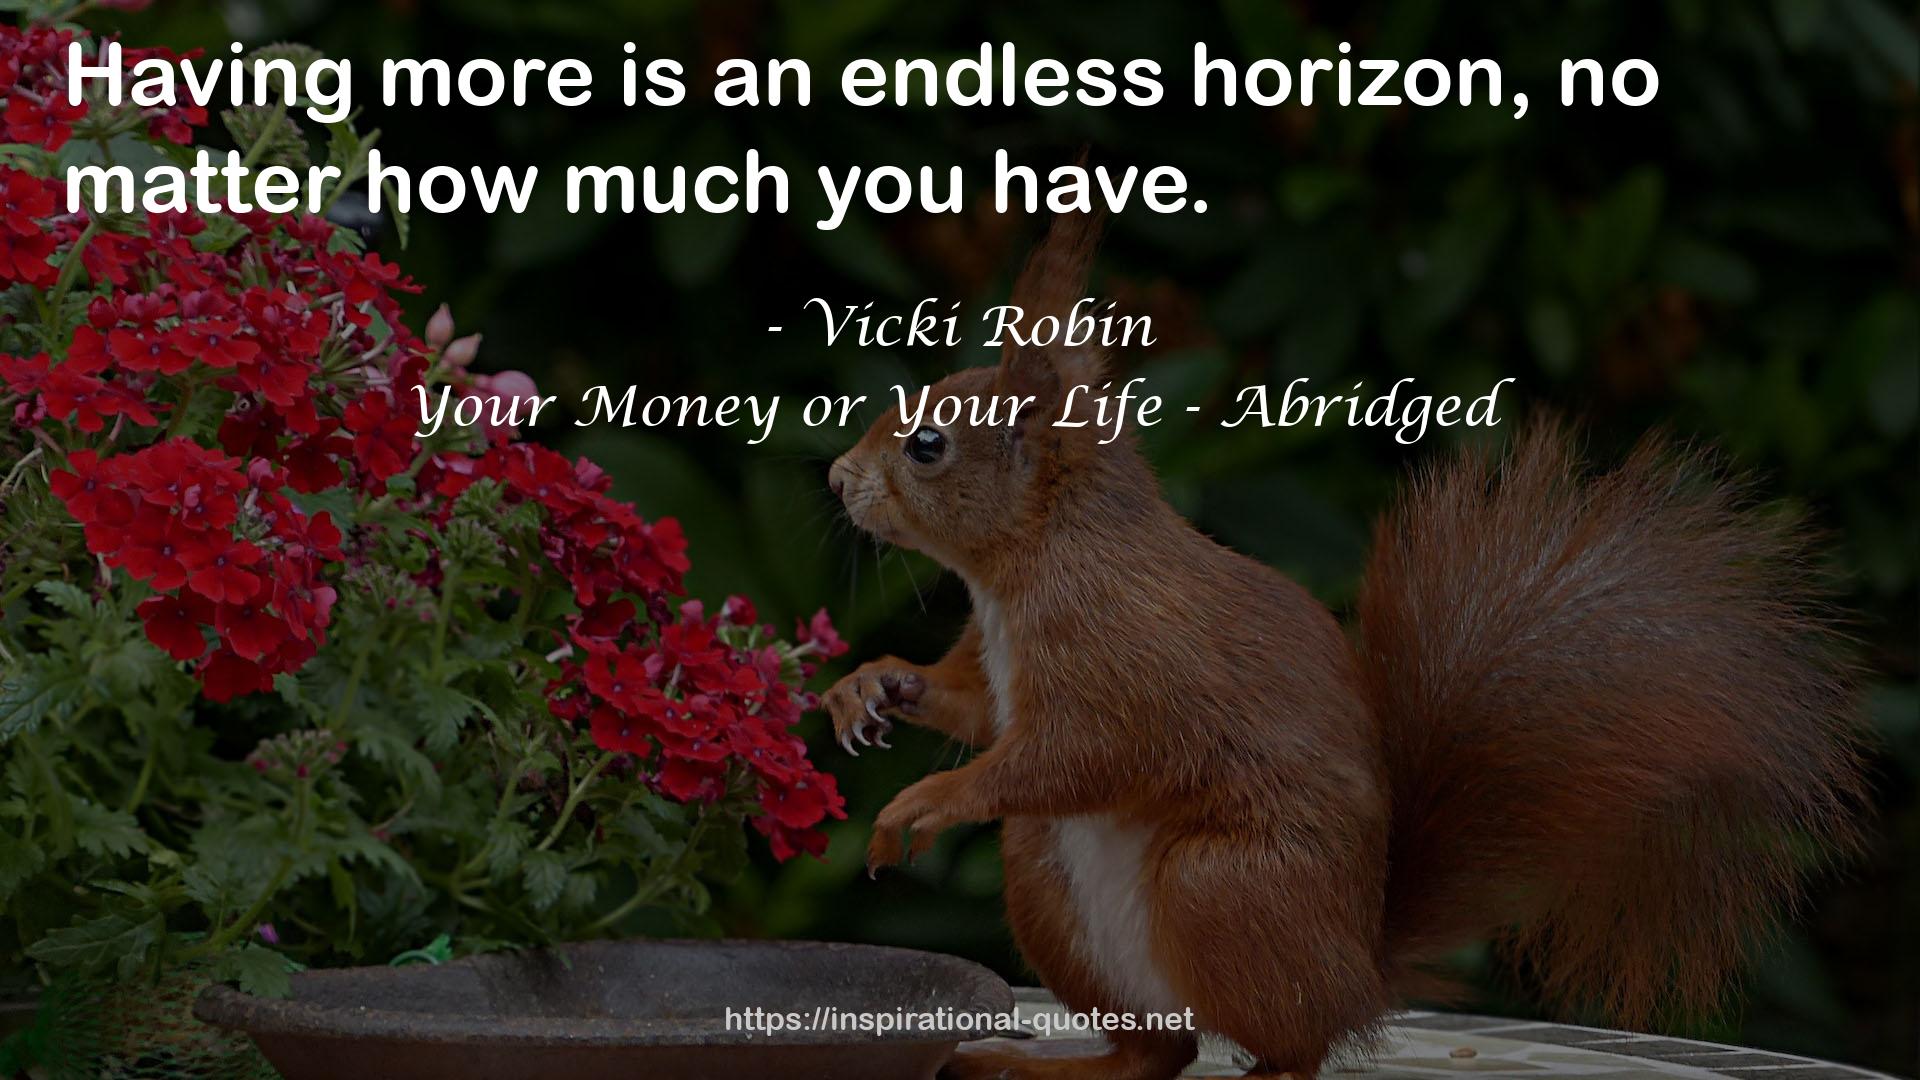 Your Money or Your Life - Abridged QUOTES